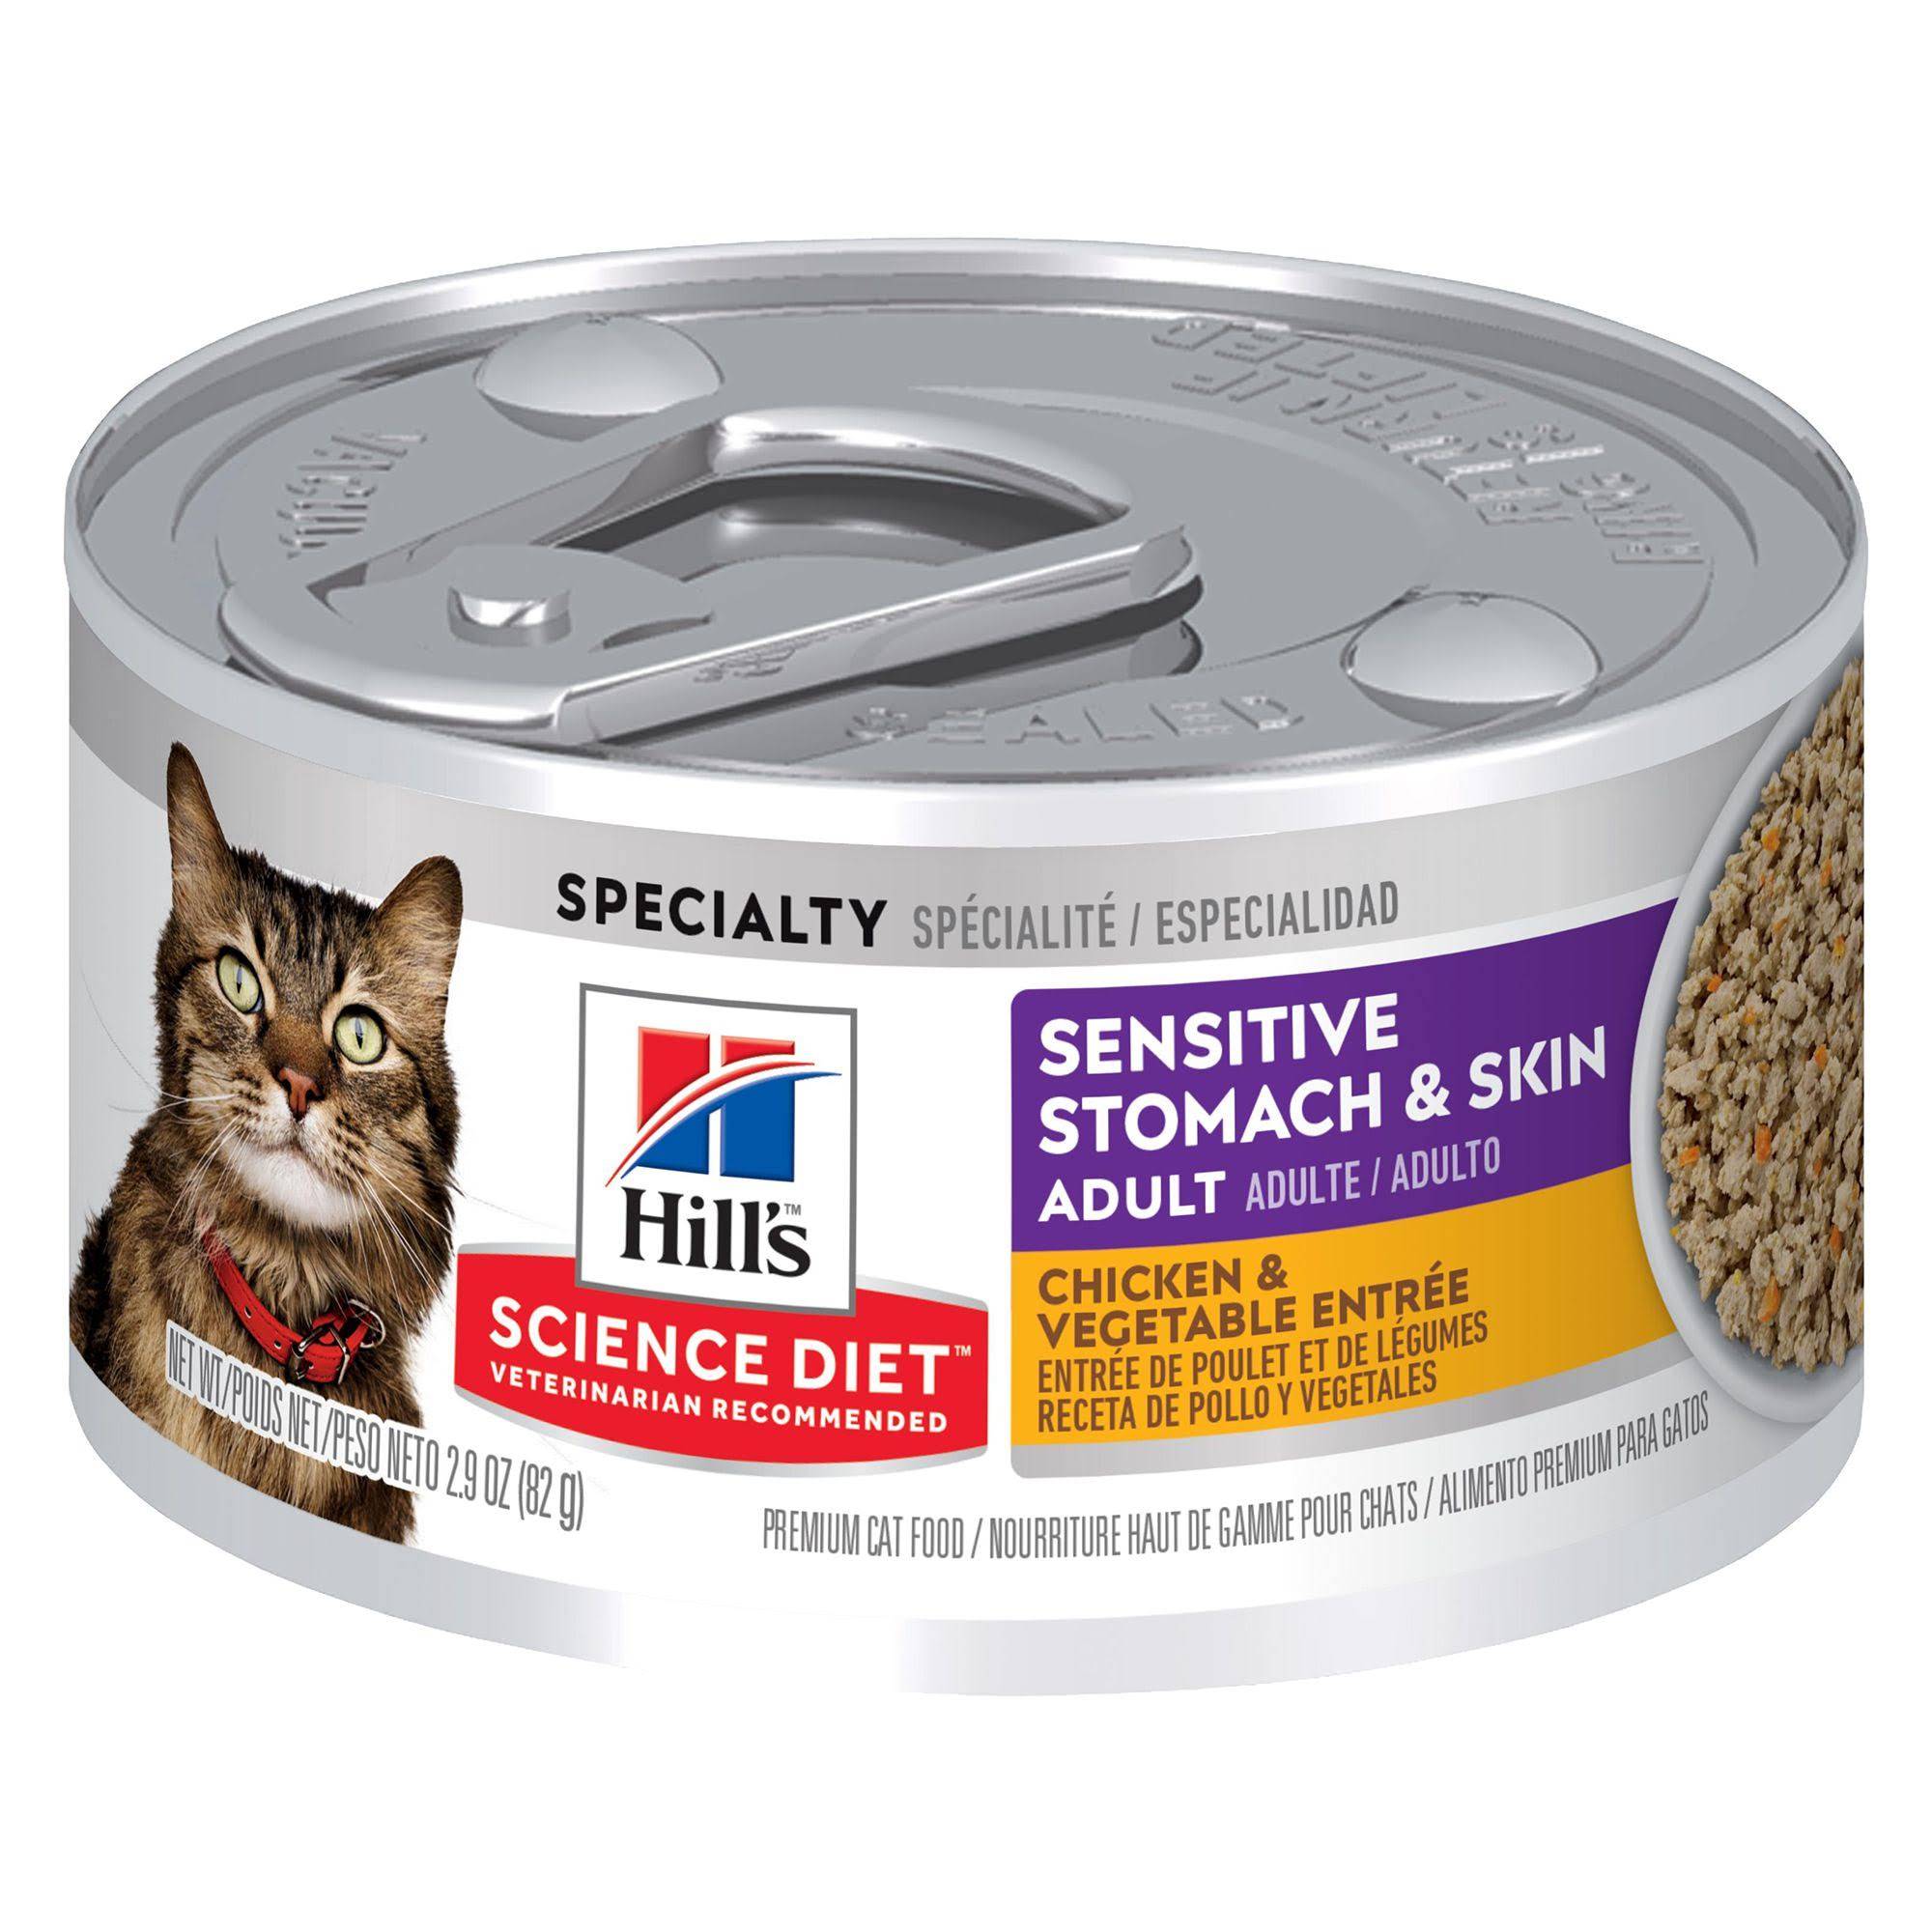 Hill's Science Diet Adult Sensitive Stomach and Skin Canned Cat Food - Chicken and Vegetable Entrée, 2.9oz, 24pk